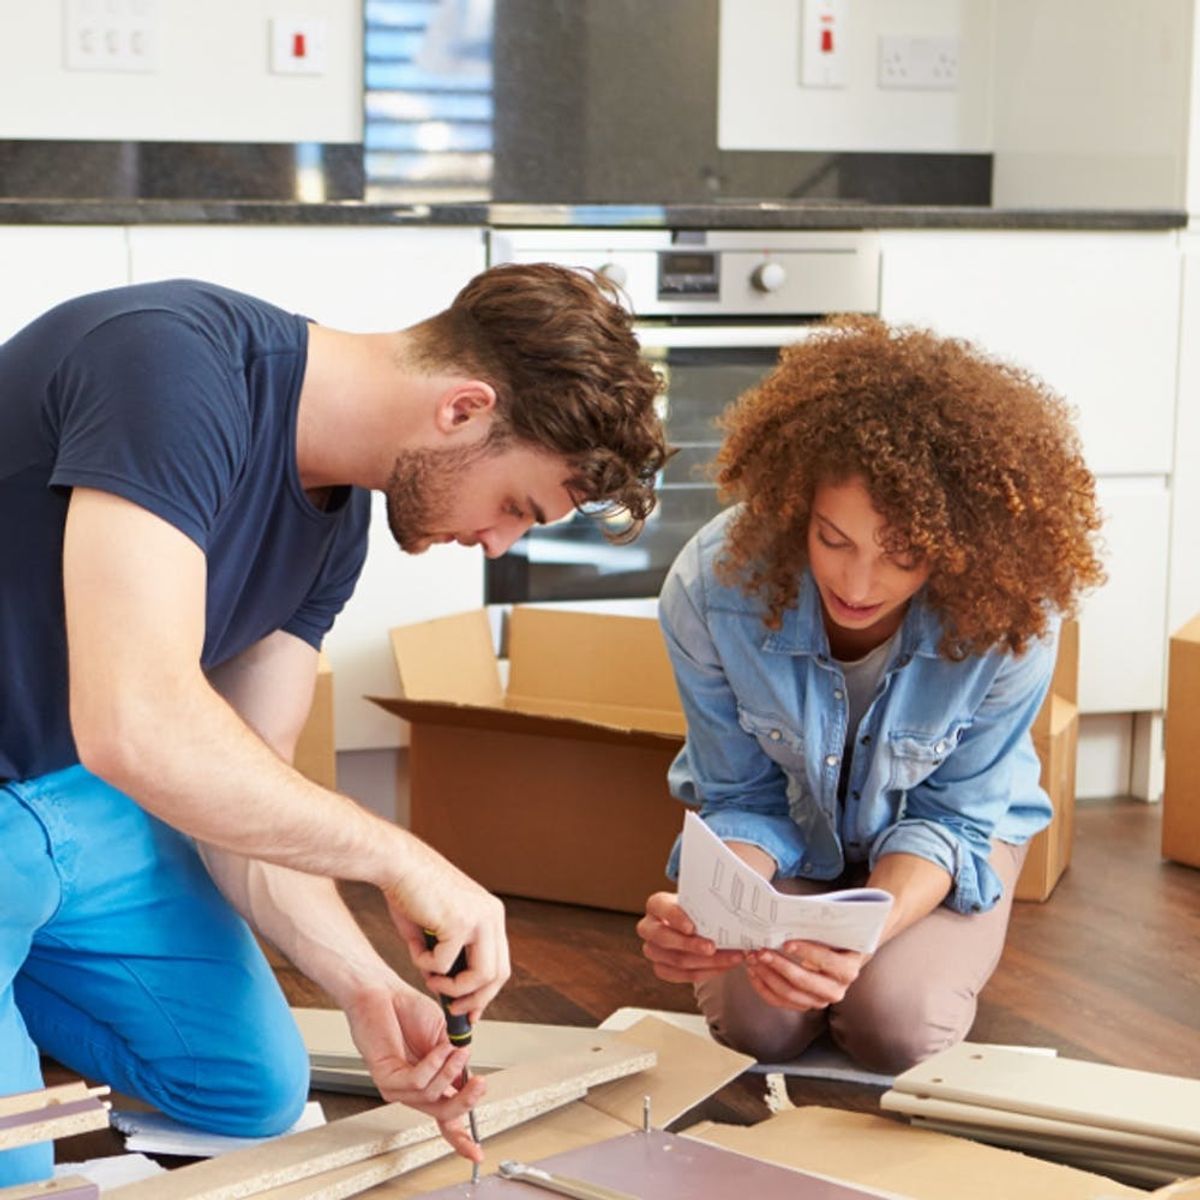 Building IKEA Furniture With Bae Could Spell Disaster for Your Relationship